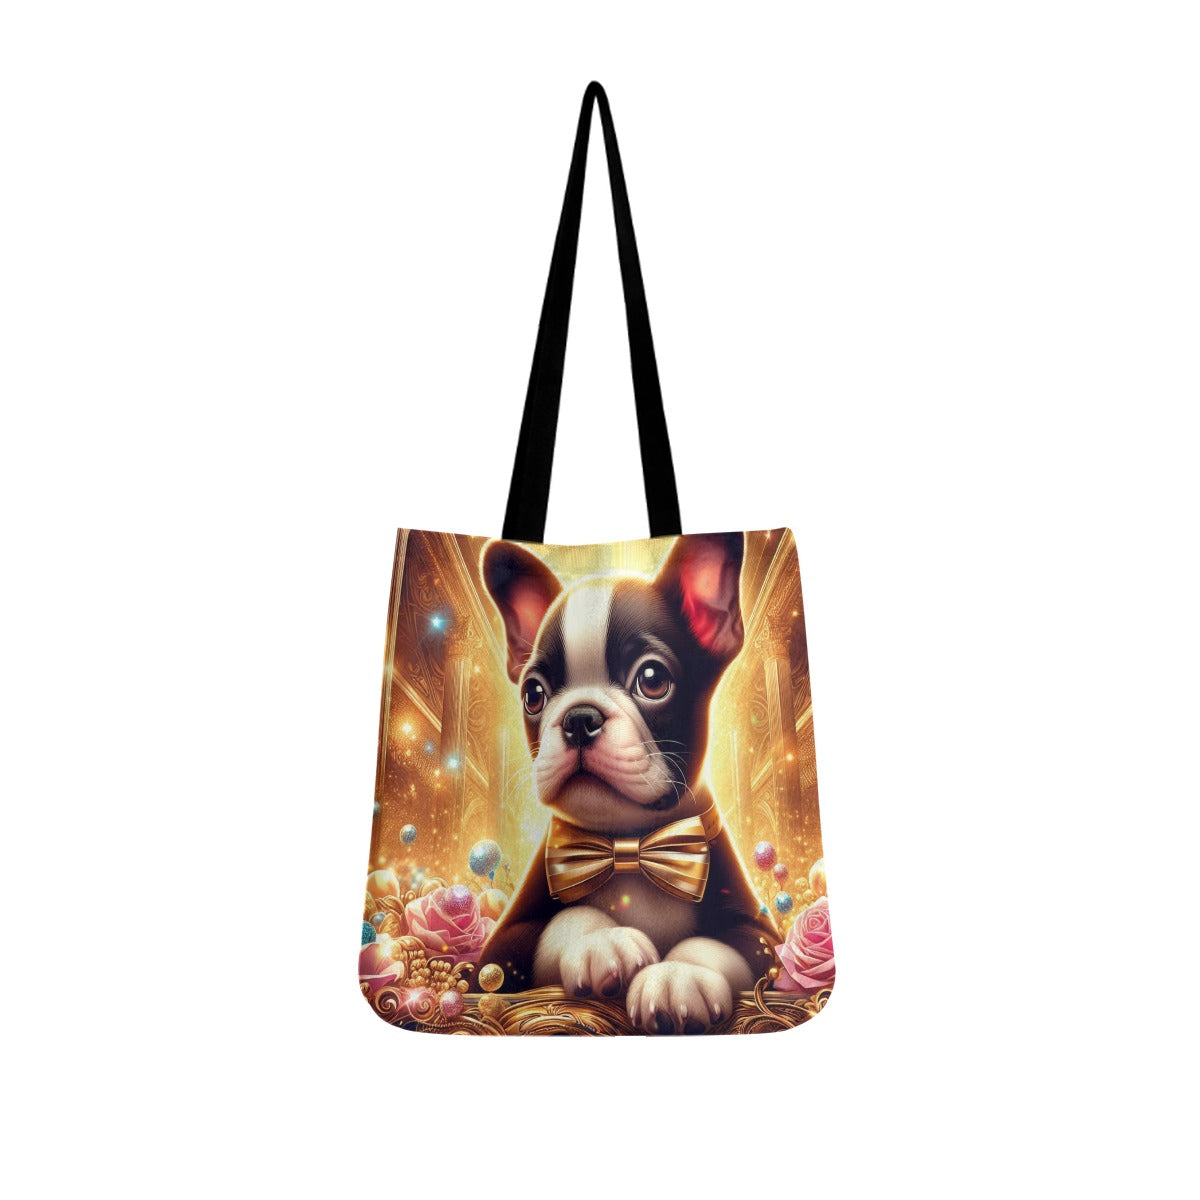 Isla - Cloth Tote Bags for Boston Terrier lovers